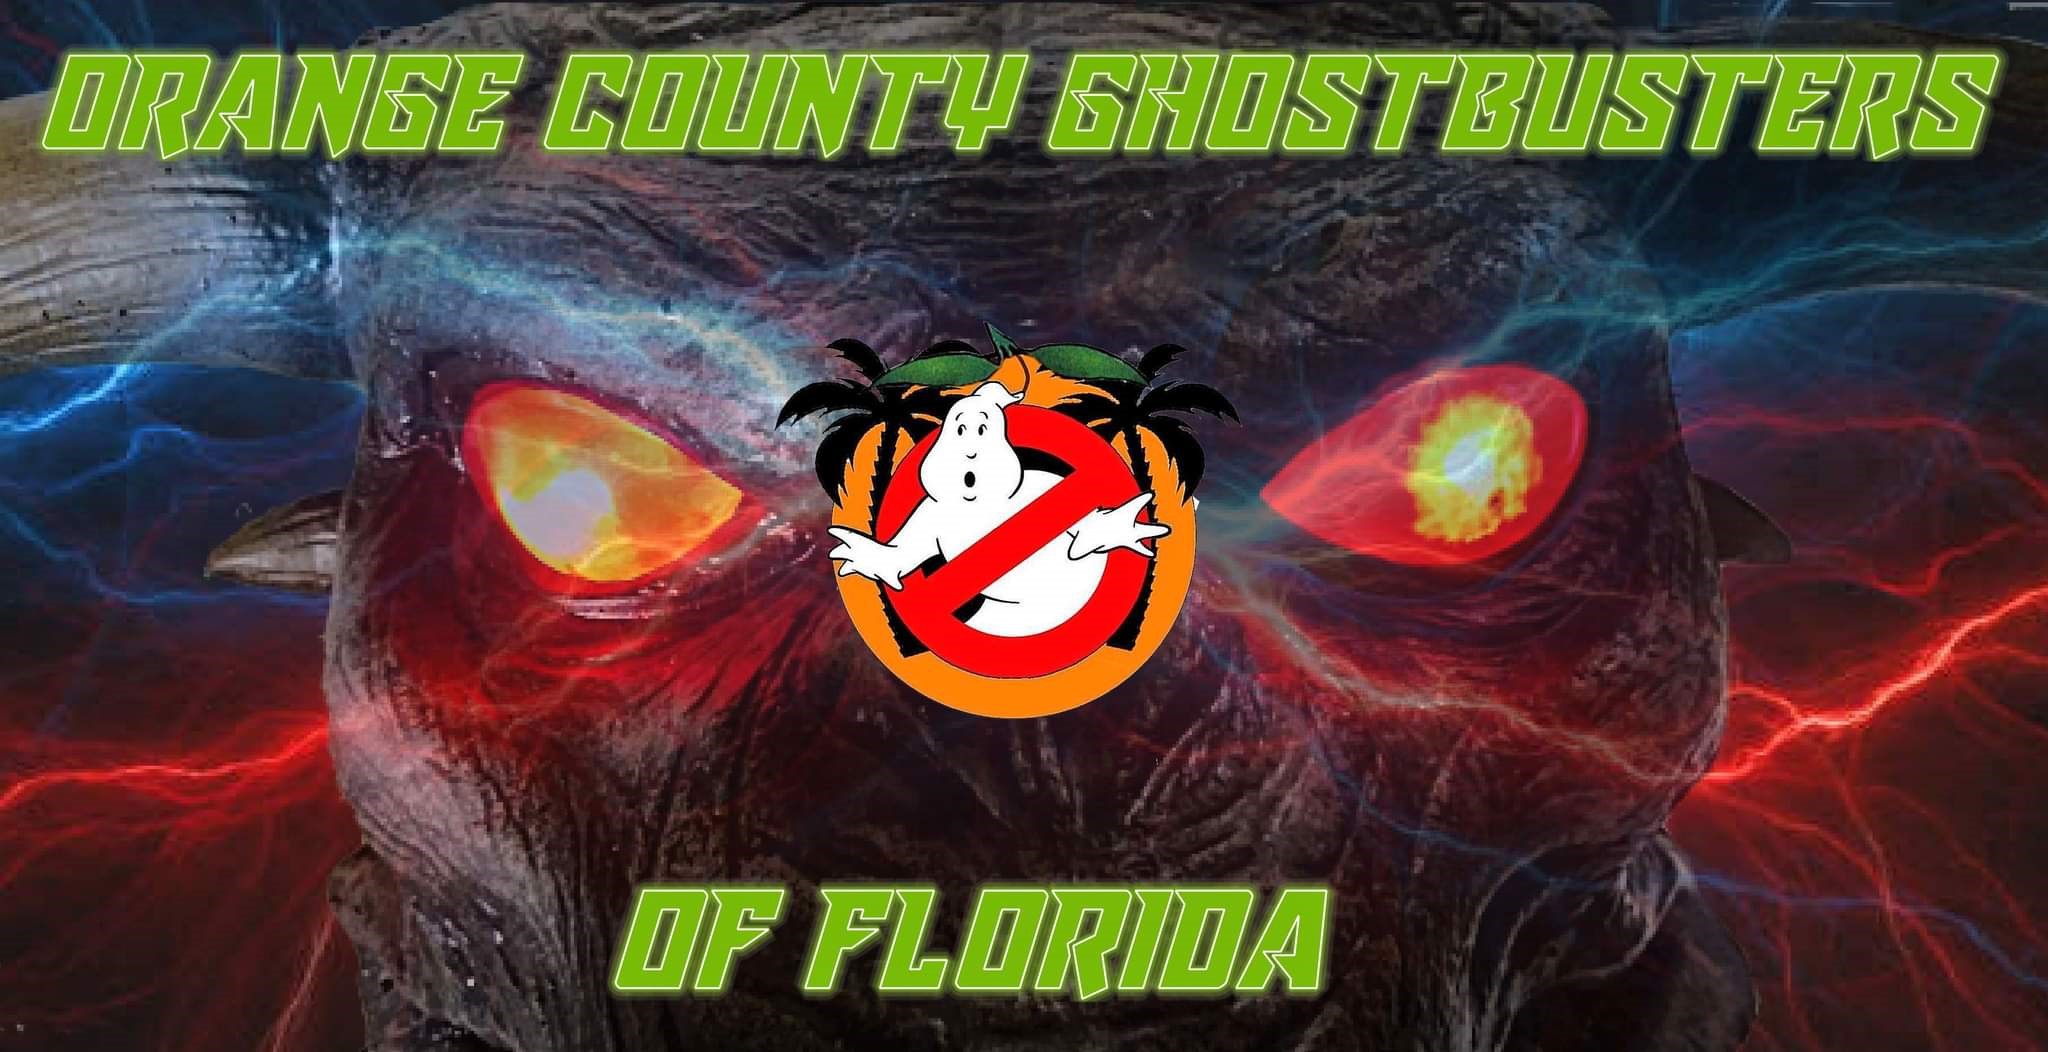 Orange County Ghostbusters of Florida